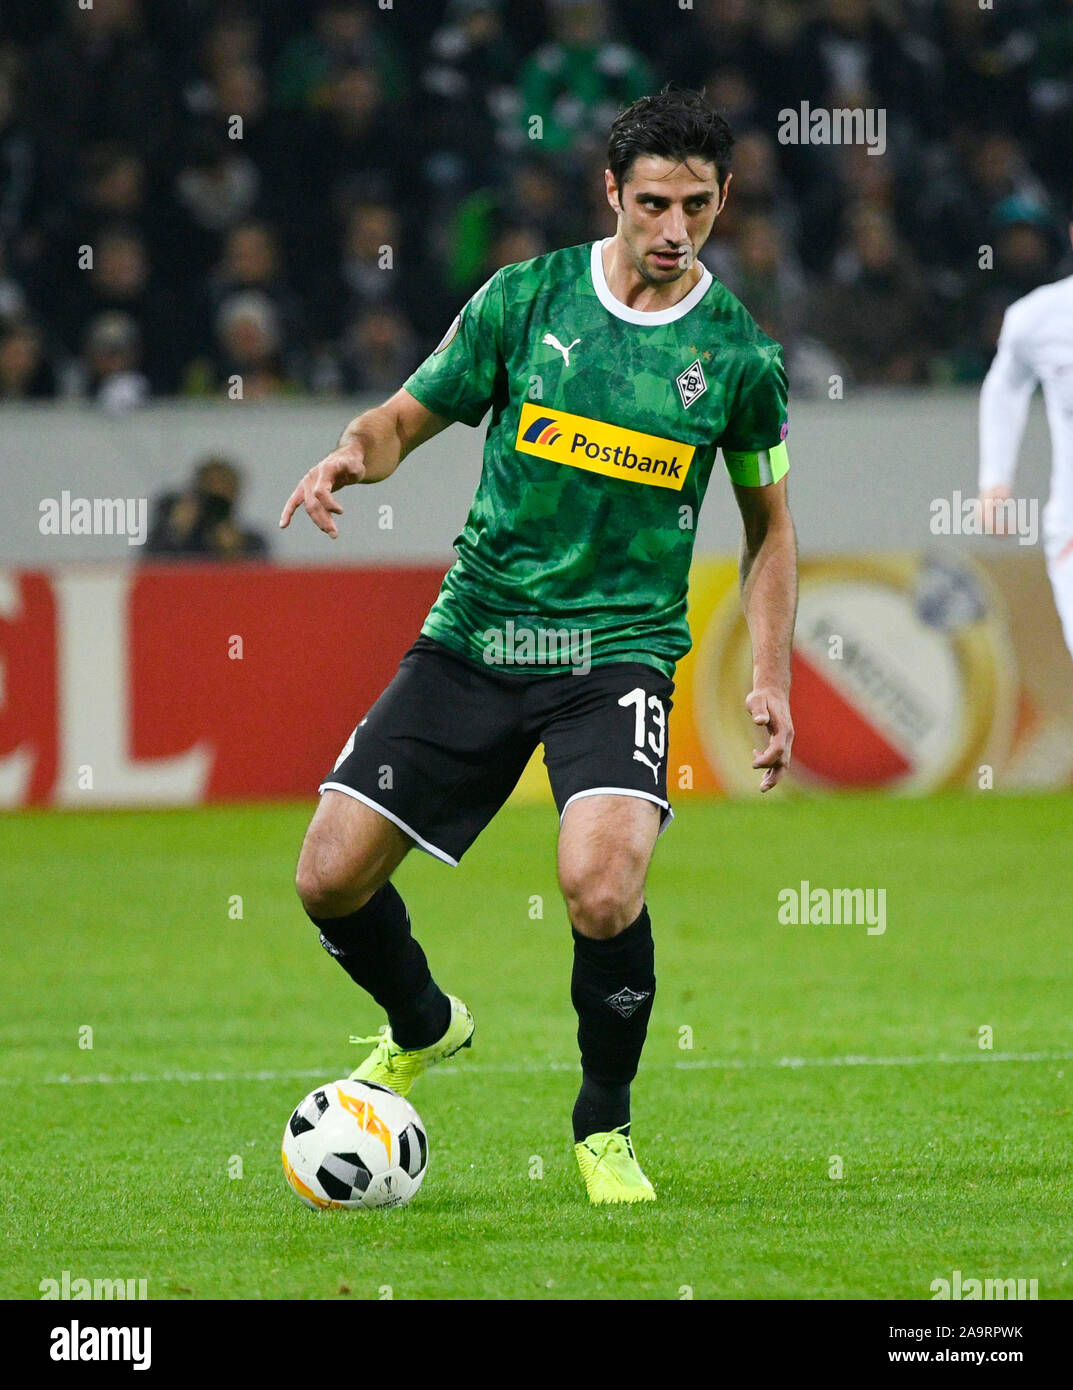 Borussia Park Monchengladbach, 7.11.2019,  Football: Europe League  Season 2019/20, matchday 4, Borussia Monchengladbach (MGL) vs. AS Rom (ROM):   Lars Stindl (MGL);   UEFA REGULATIONS PROHIBIT ANY USE OF PHOTOGRAPHS AS IMAGE SEQUENCES AND/OR QUASI-VIDEO Stock Photo